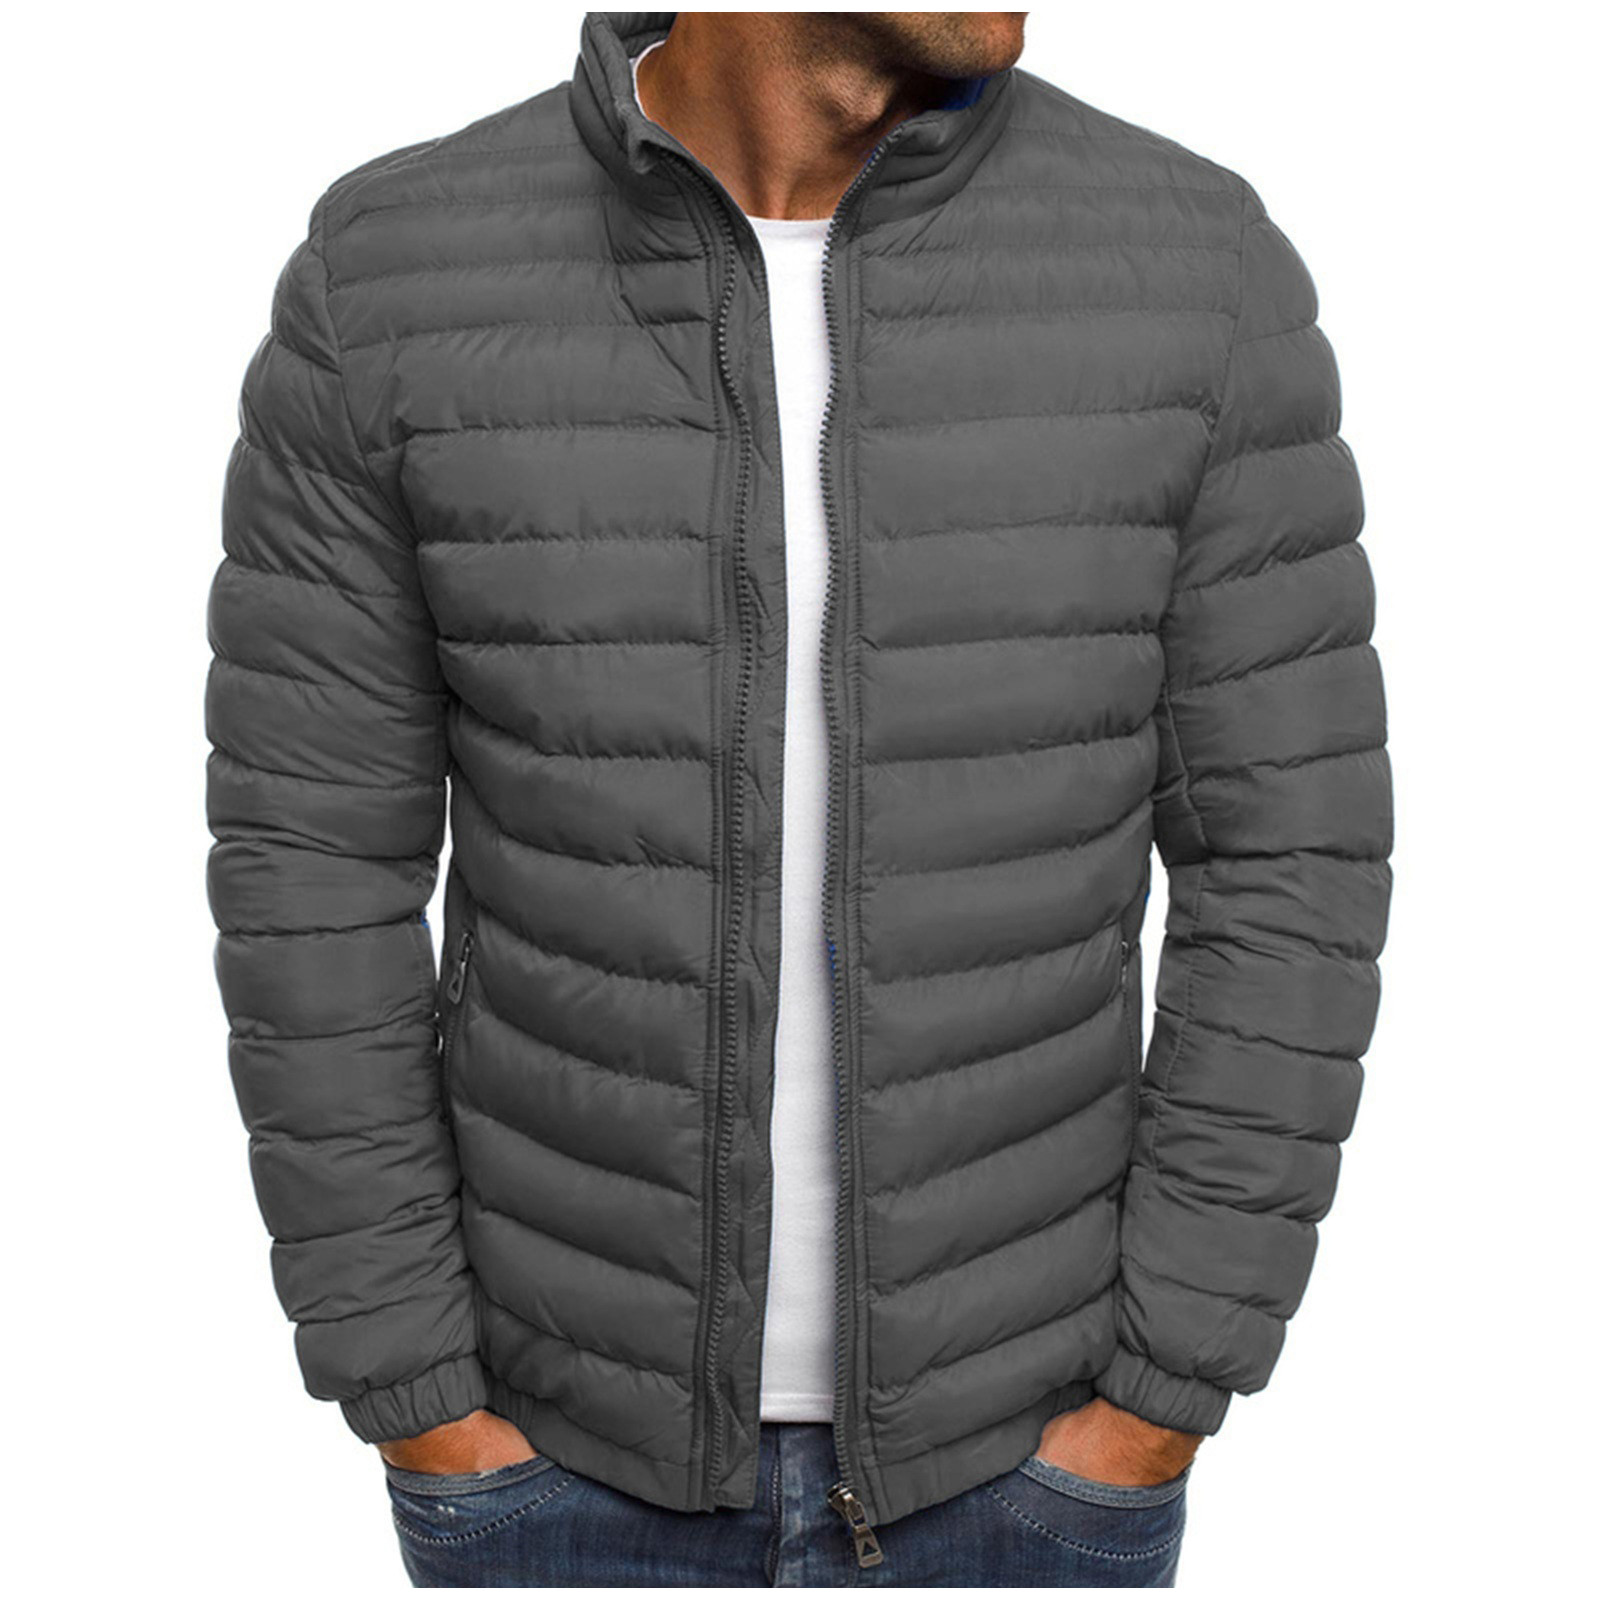 TIHLMK Men's Down Jackets & Coats Deals Clearance Men's Solid Color Jacket Cotton Padded Jacket Fashion Cotton Padded Jacket Men's Warm Cotton Padded Jacket Gray - image 1 of 3